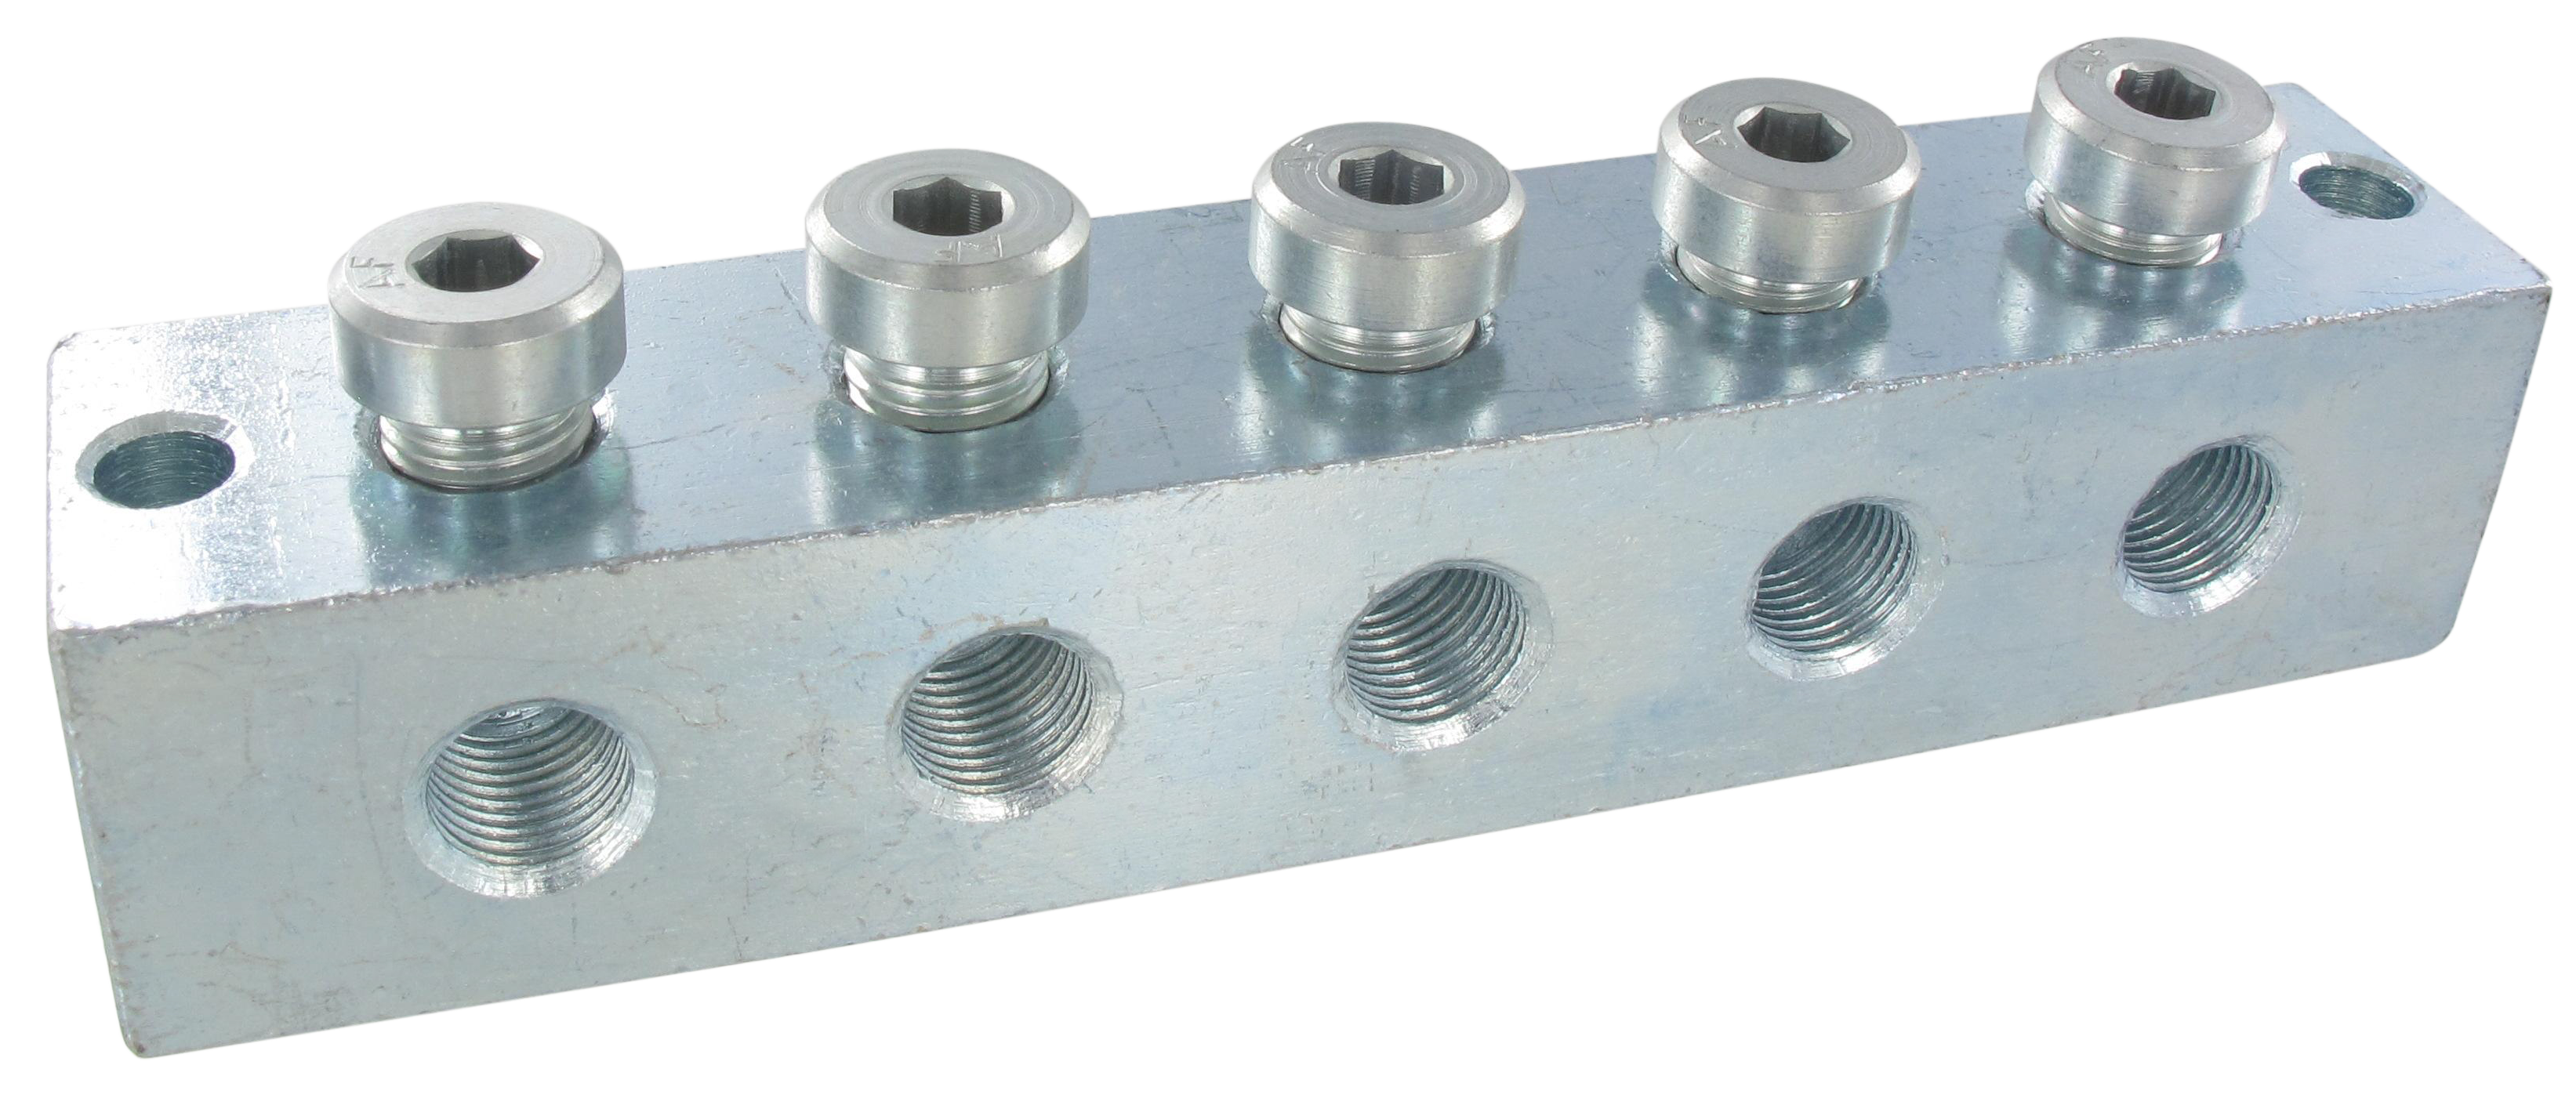 Threaded T-connector manifold M10x1 with 5 connections in galvanised steel Standard fittings for lubrication